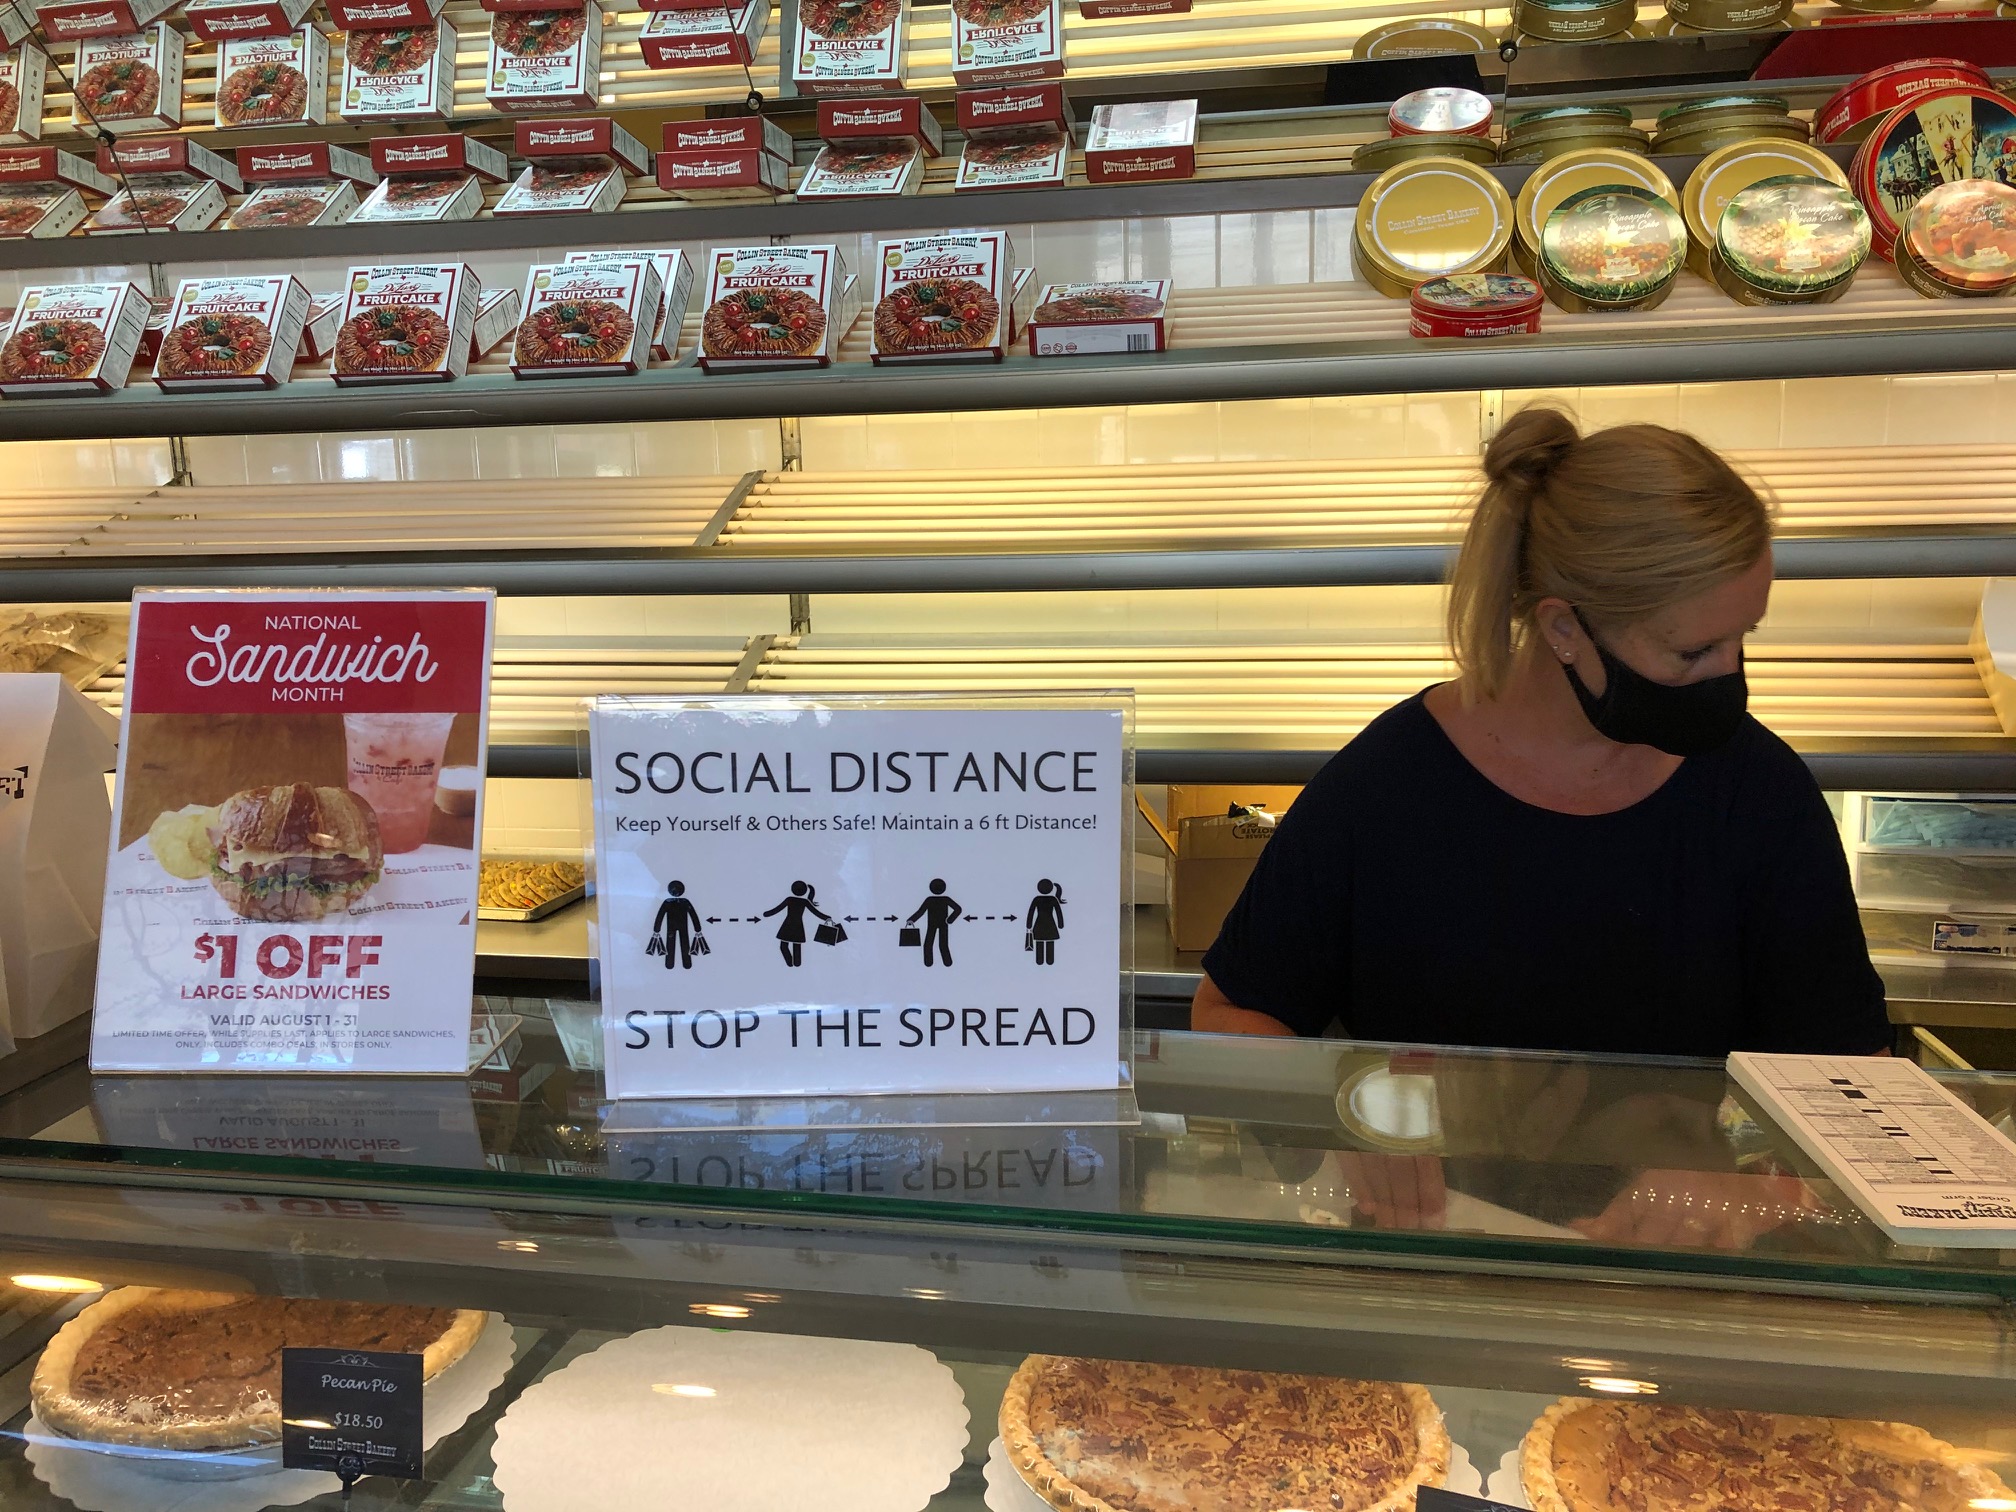 Woman behind the counter at Collin Street Bakery wears a mask